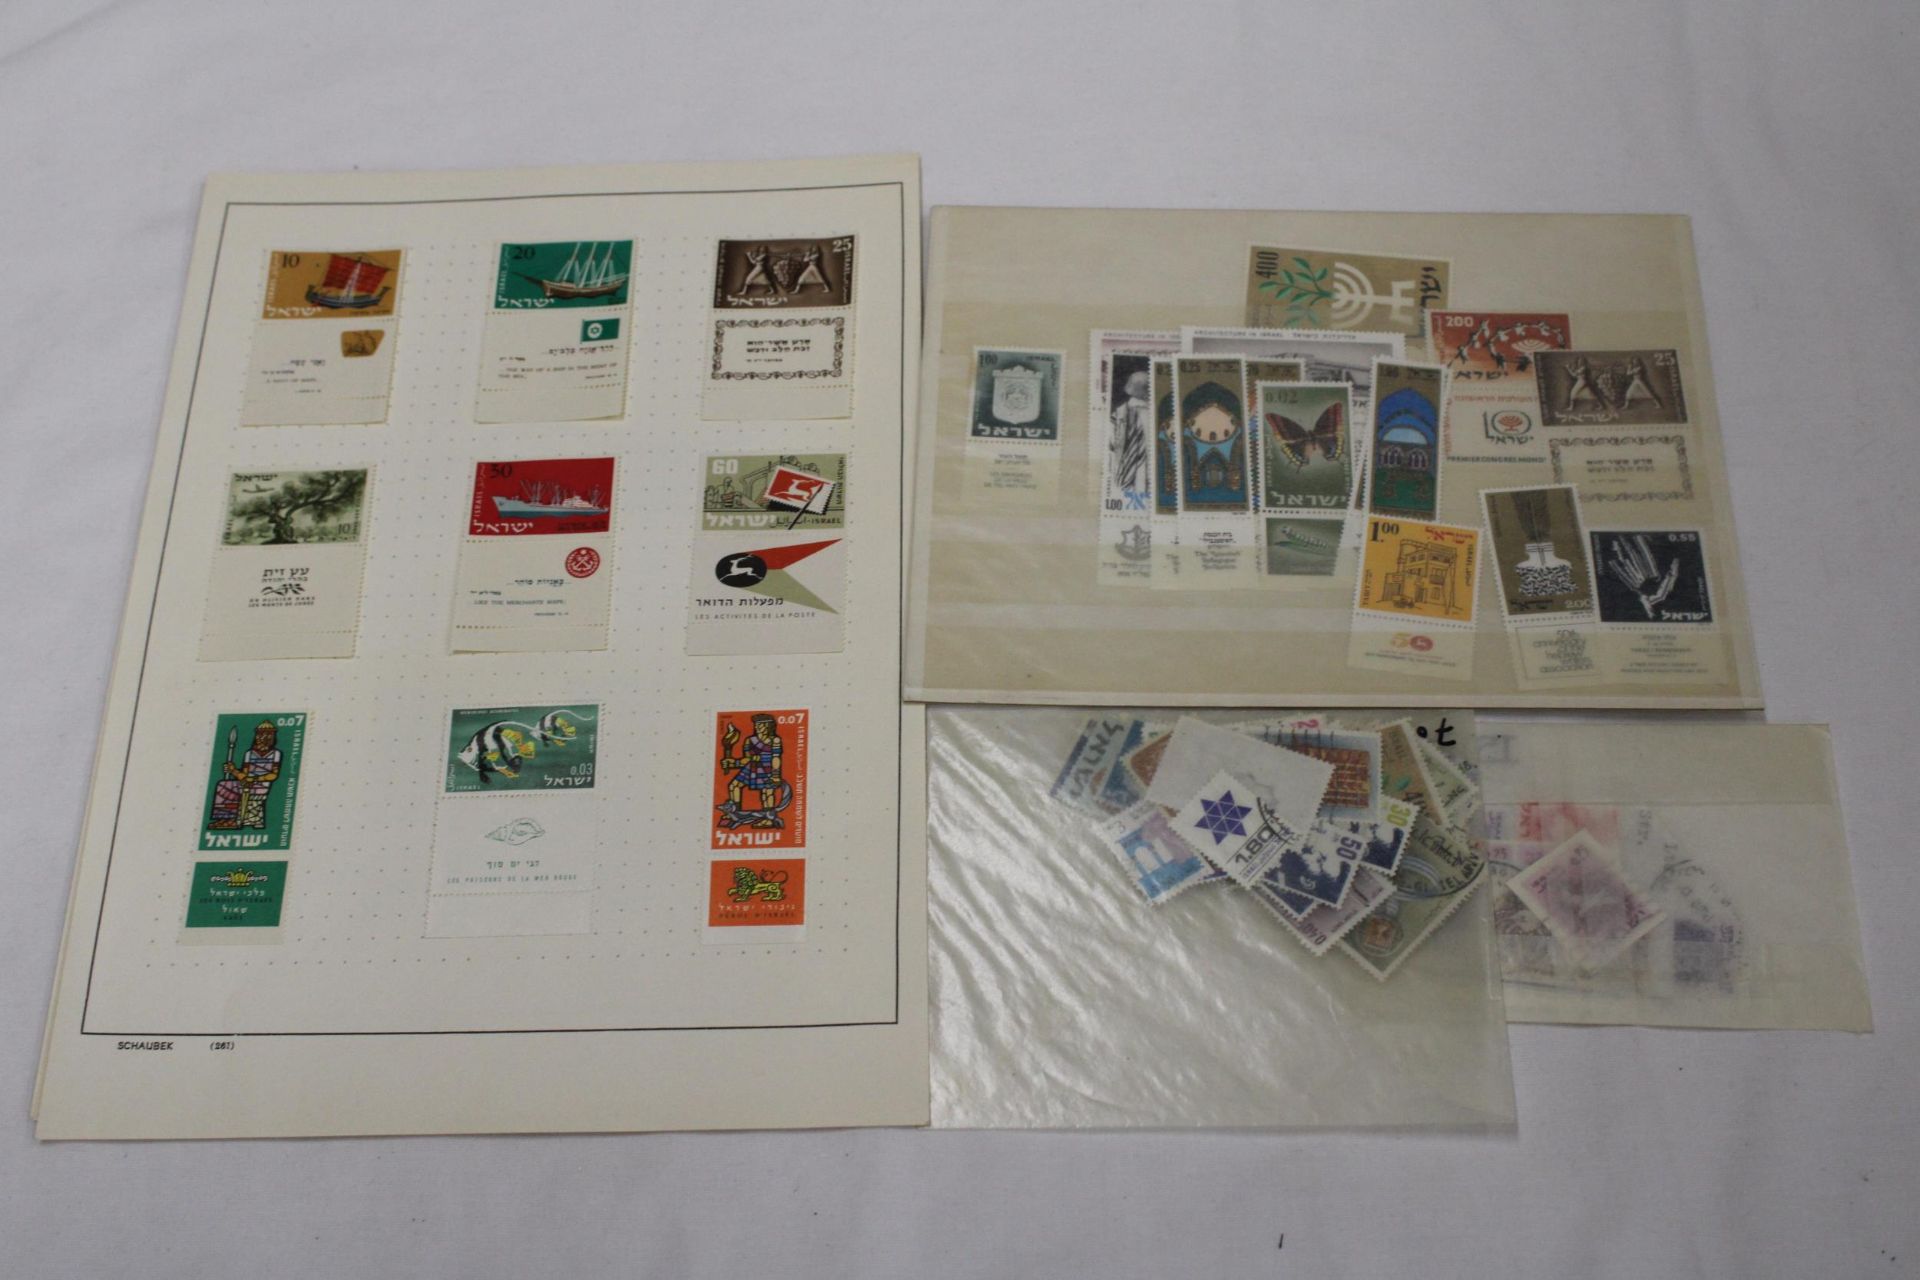 A COLLECTION OF ISRAELI STAMPS